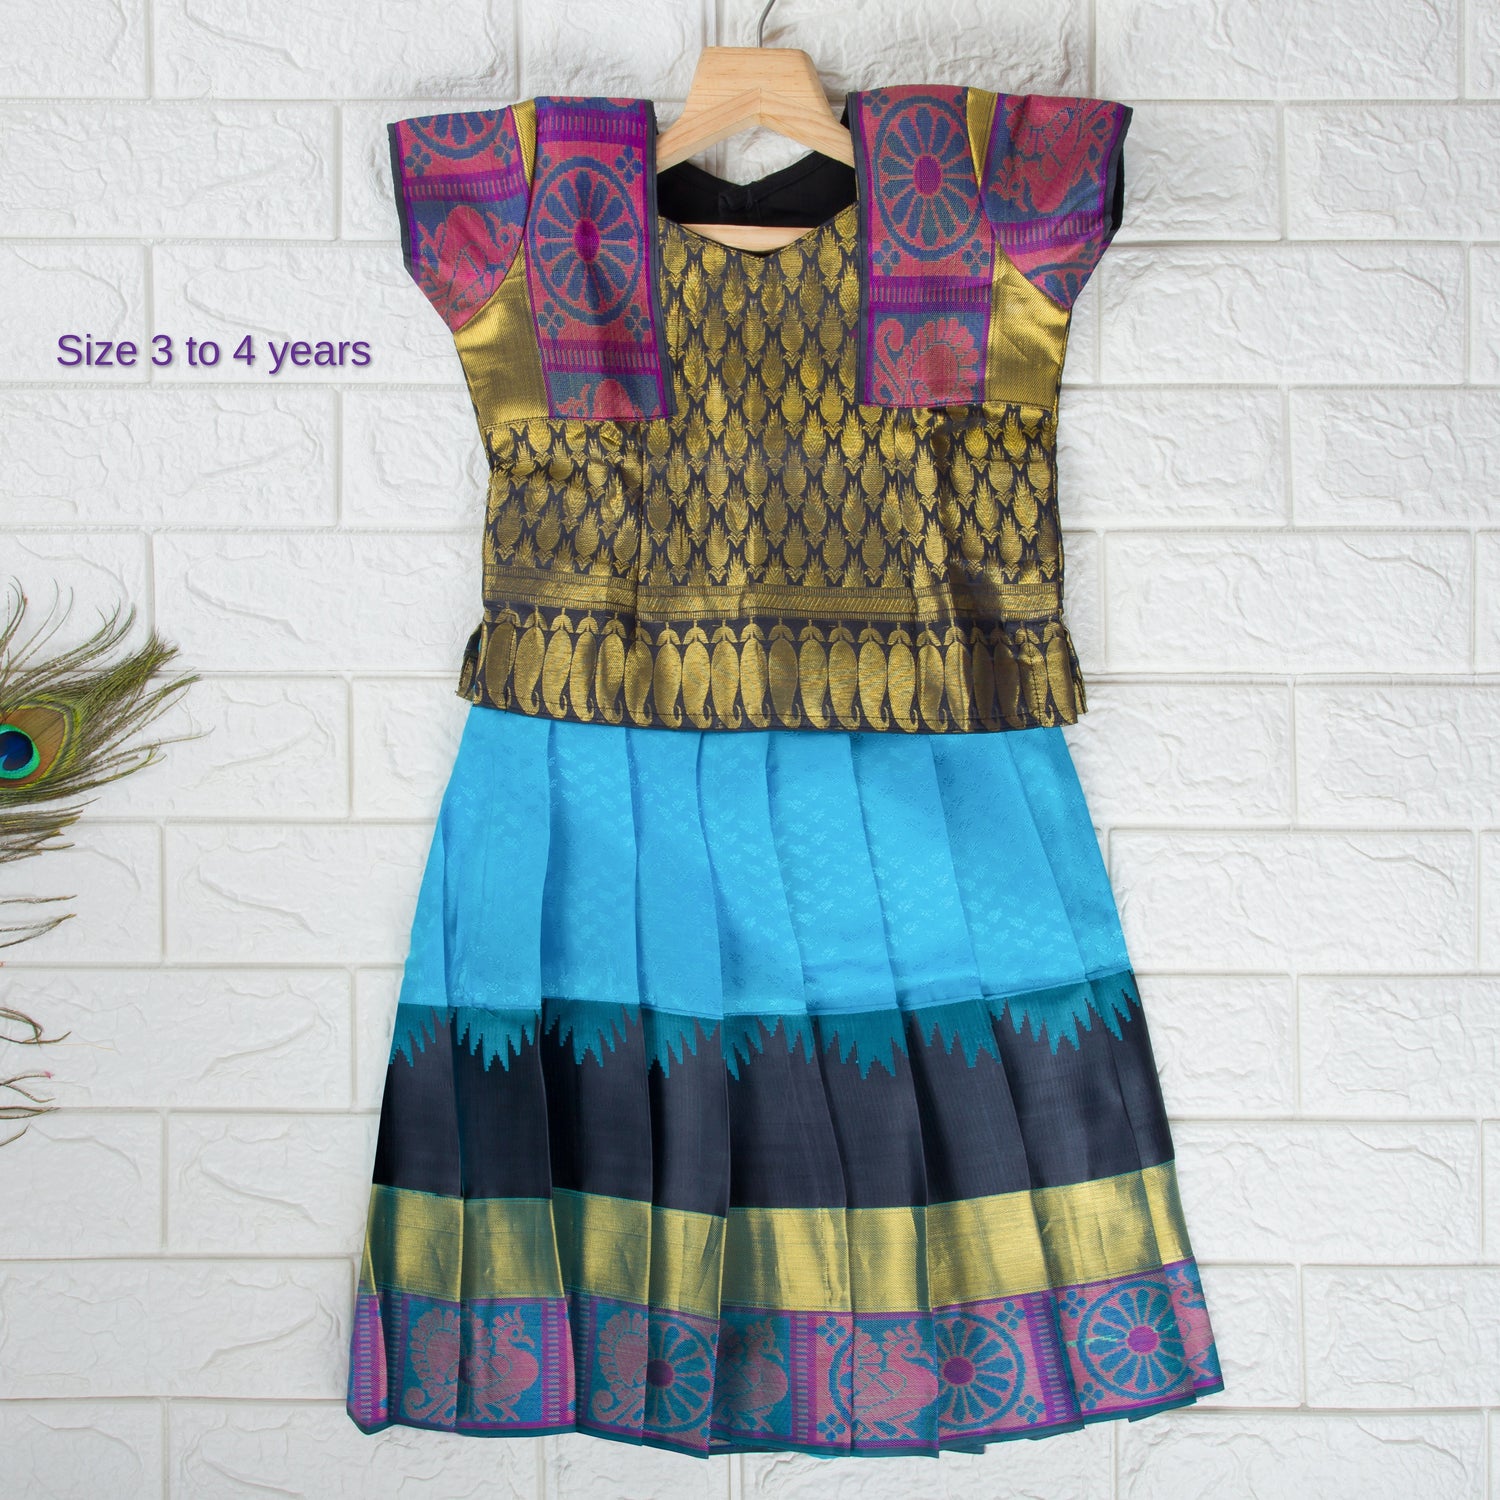 Pattu Pavadai Girls Festive & Party Top and Skirt Set Price in India - Buy Pattu  Pavadai Girls Festive & Party Top and Skirt Set online at Flipkart.com